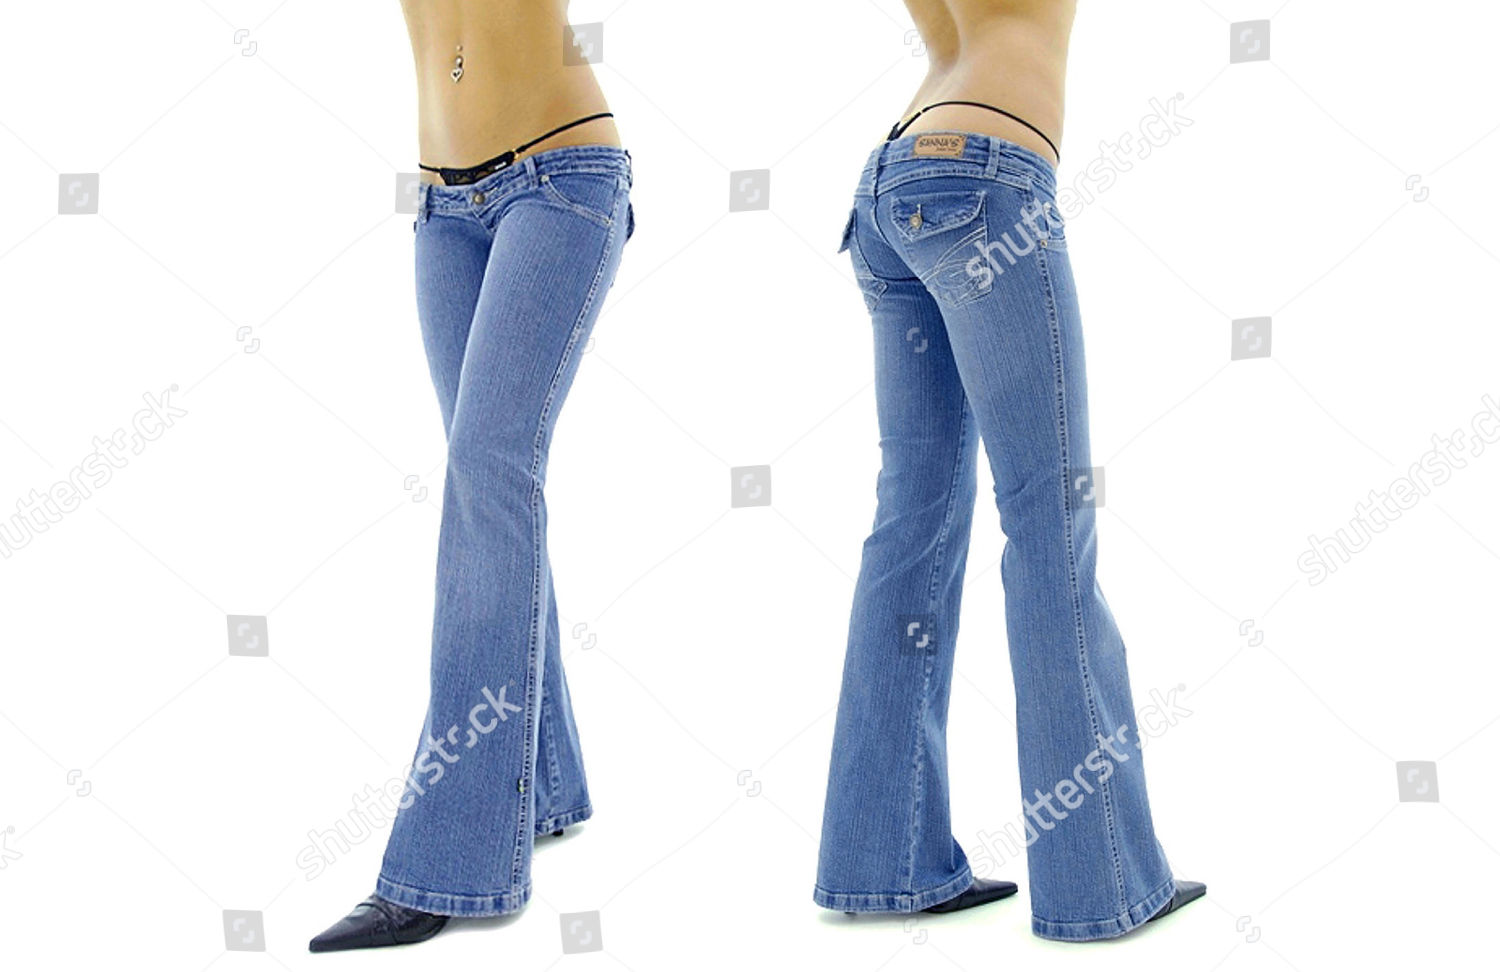 Panties For Low Cut Jeans Images